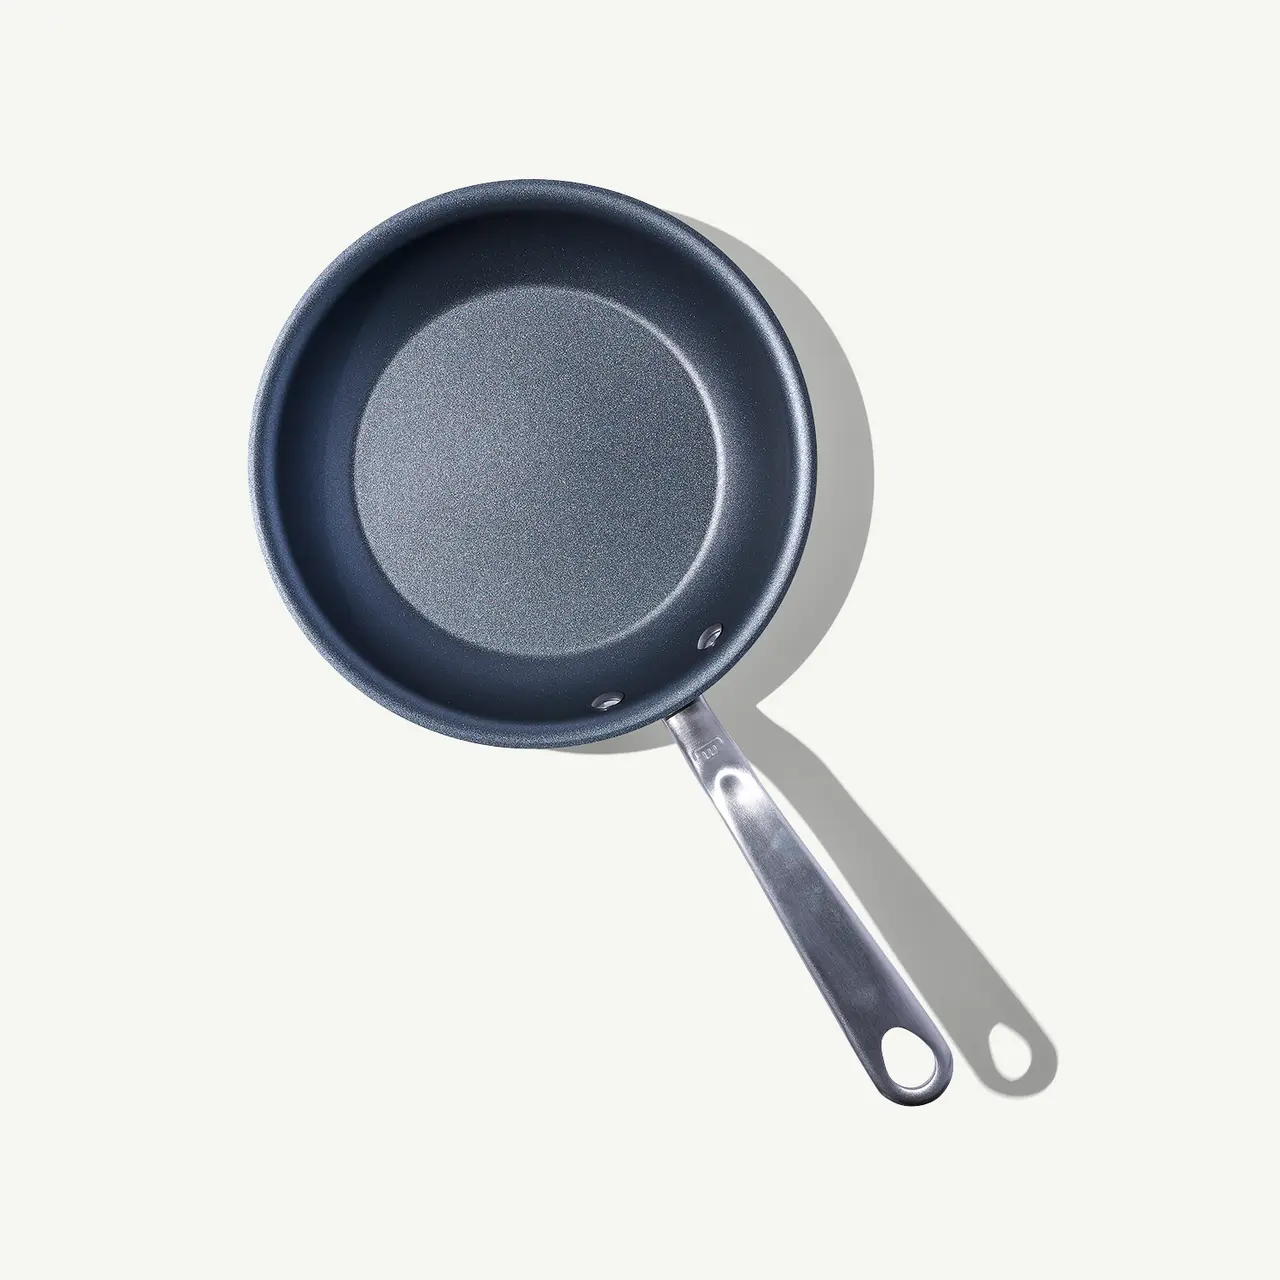 A non-stick frying pan with a silver handle, pictured against a light background.